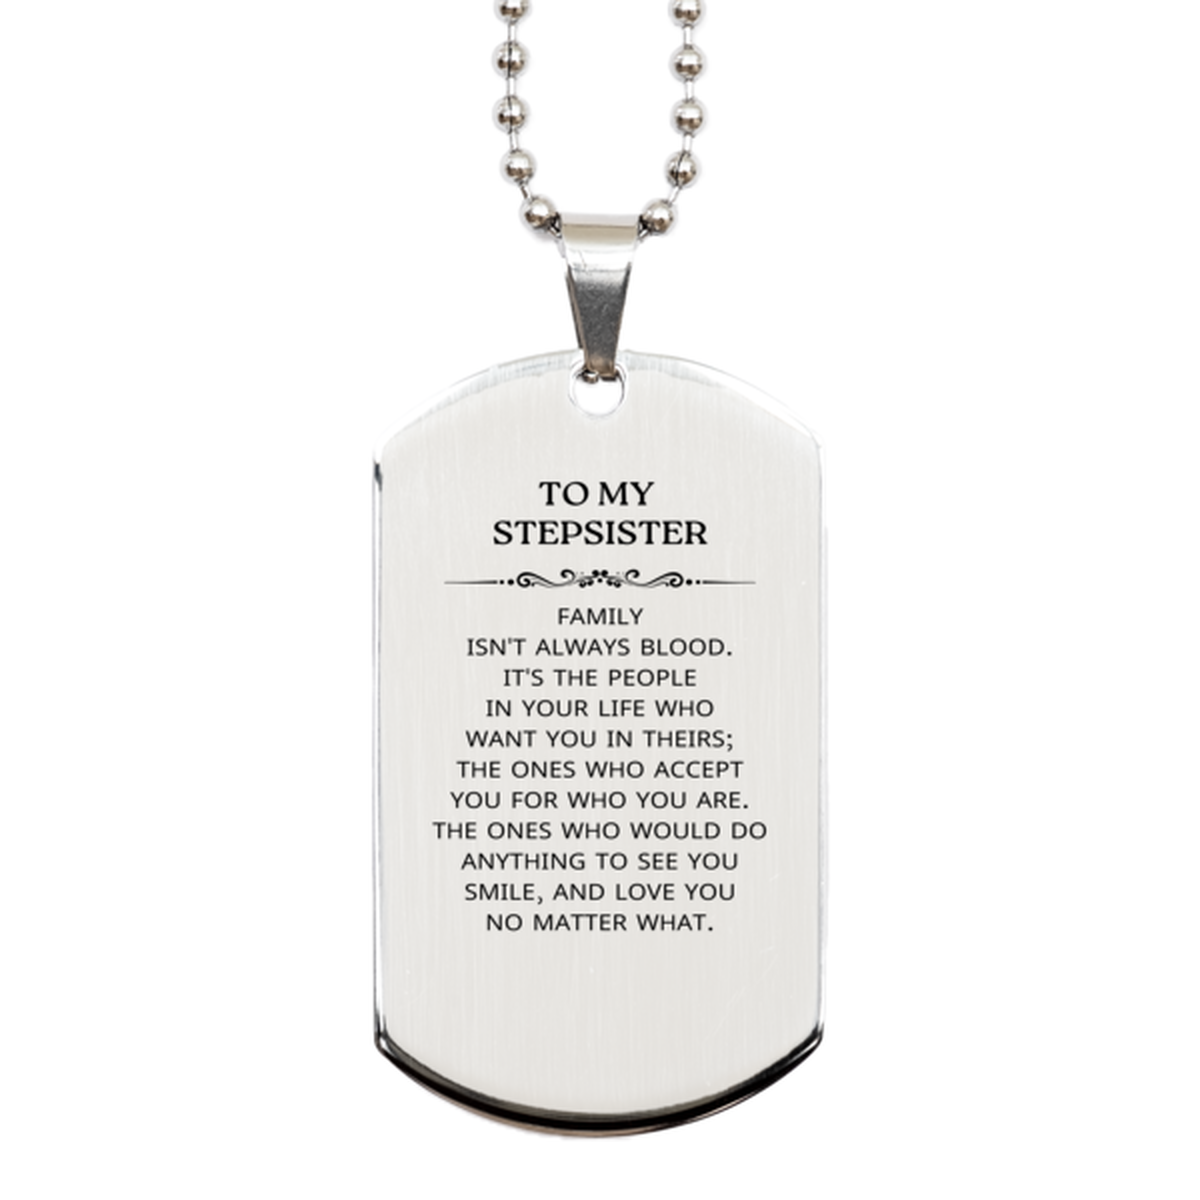 To My Stepsister Gifts, Family isn't always blood, Stepsister Silver Dog Tag, Birthday Christmas Unique Present For Stepsister